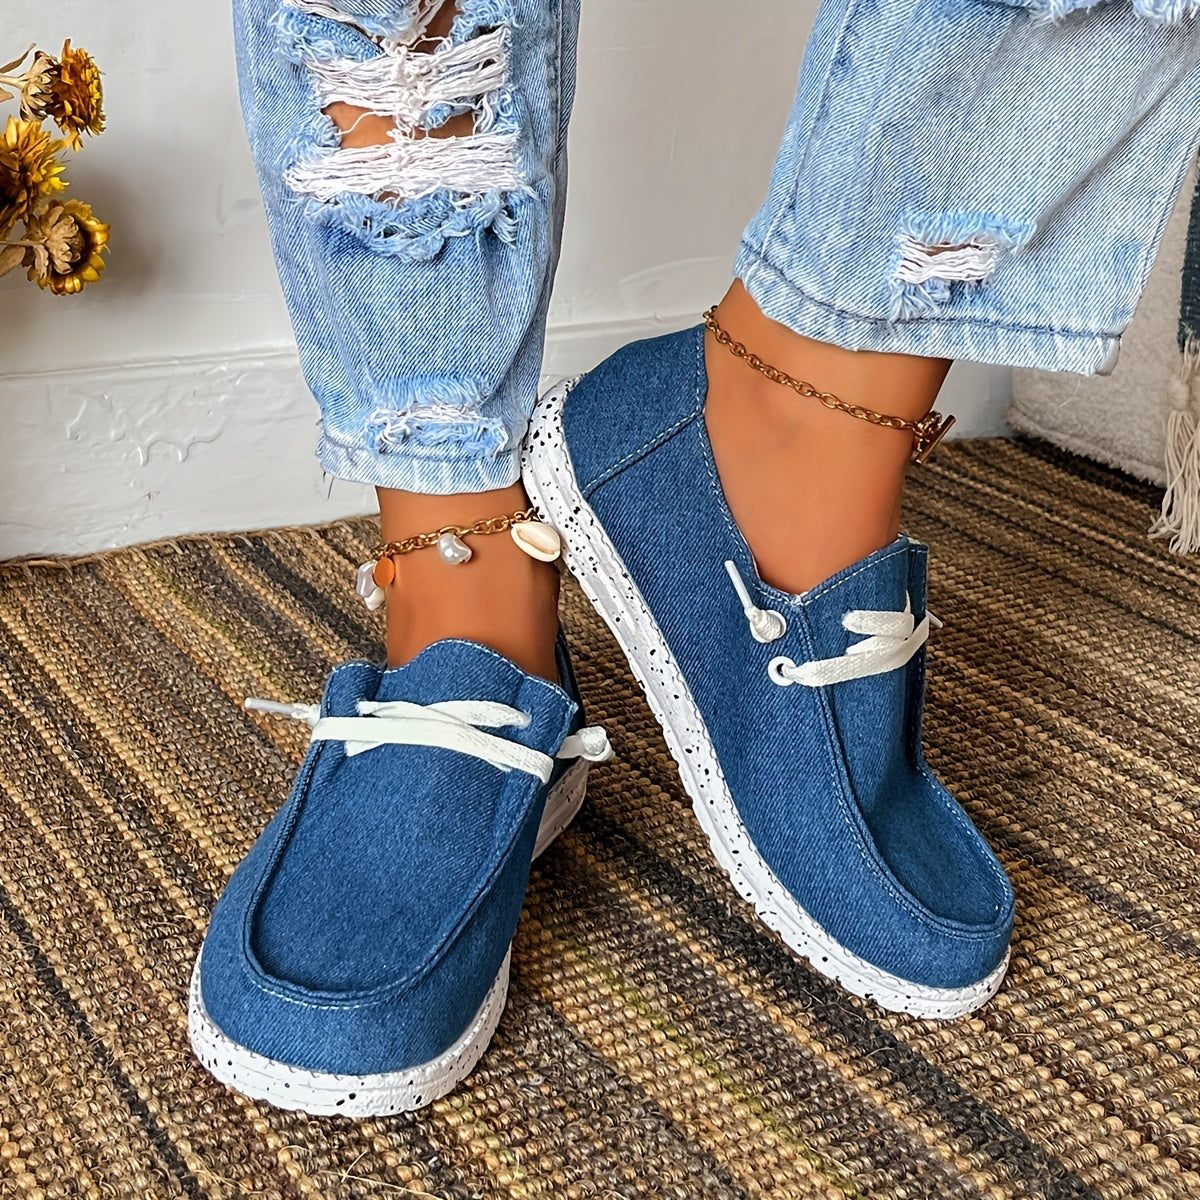 Solid Color Canvas Shoes, Casual Lace Up Low Top Sneakers